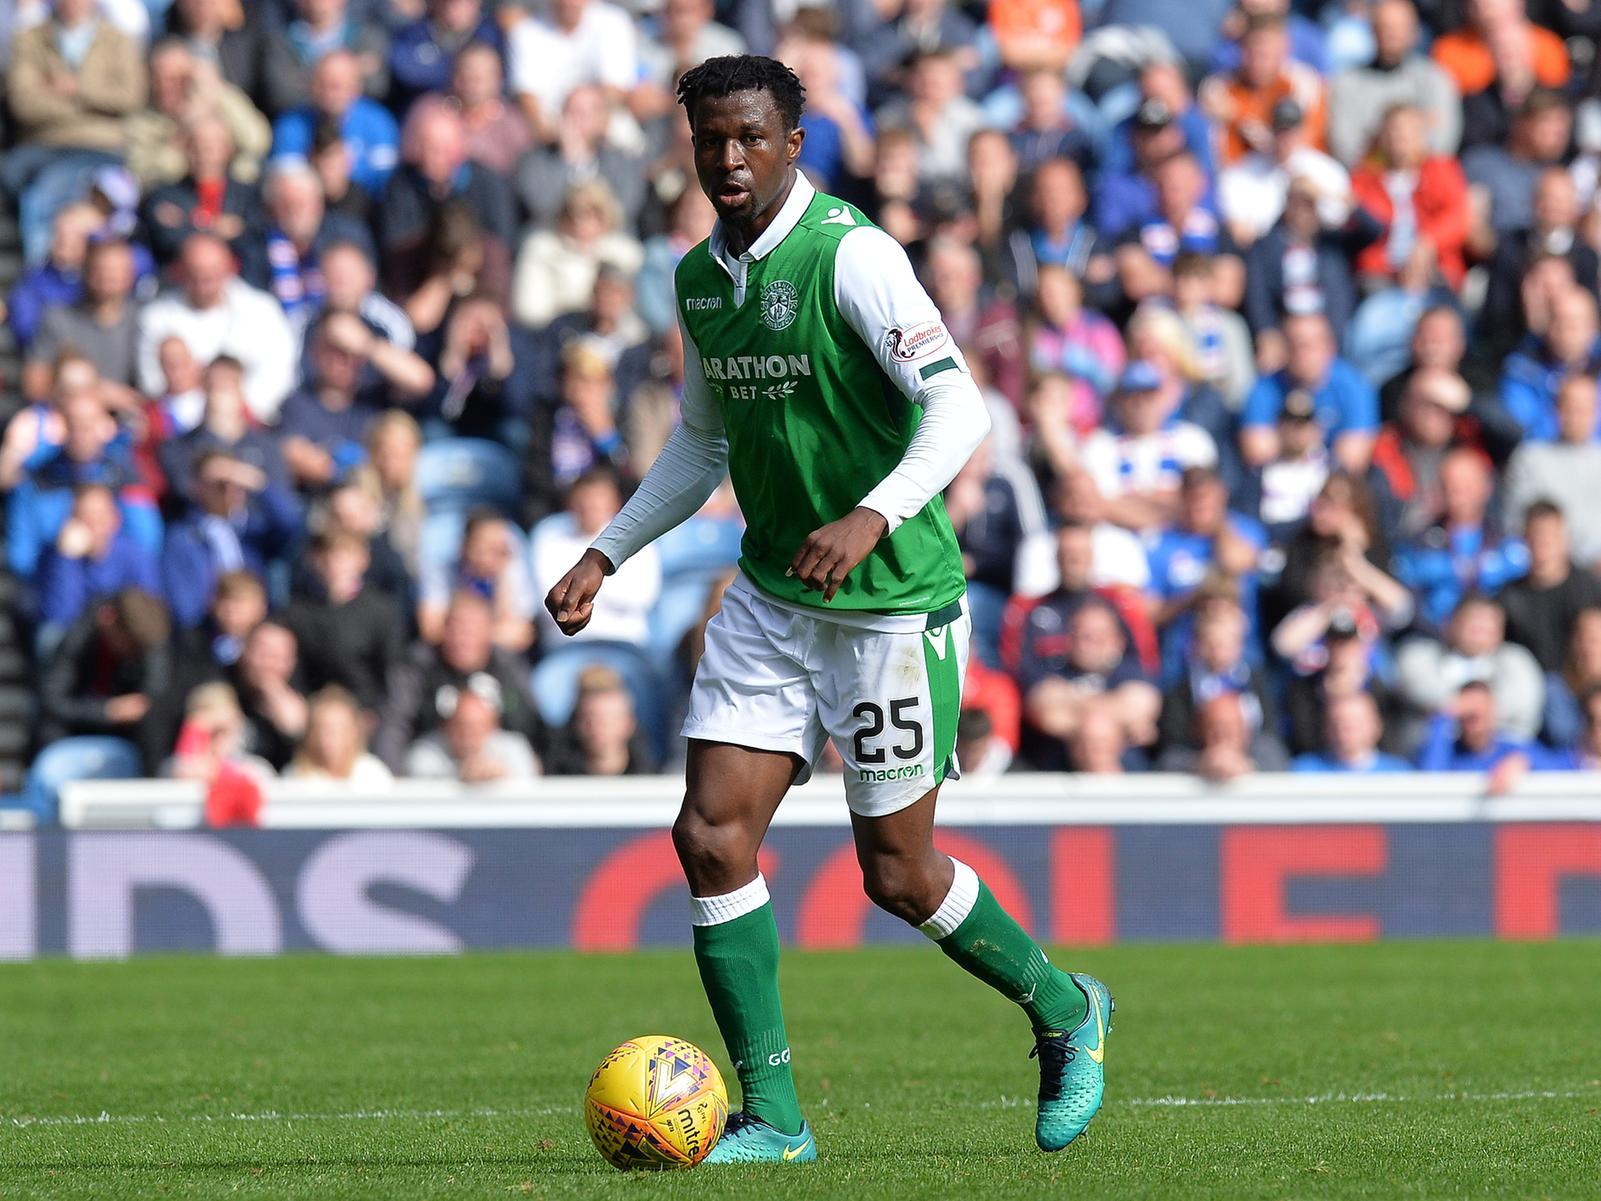 If Blackpool need experience at the back, they need look no further than Ambrose - whose spells with Hibernian, Celtic and Derby County saw him make over 250 appearances. Hes got international experience with Nigeria, too.